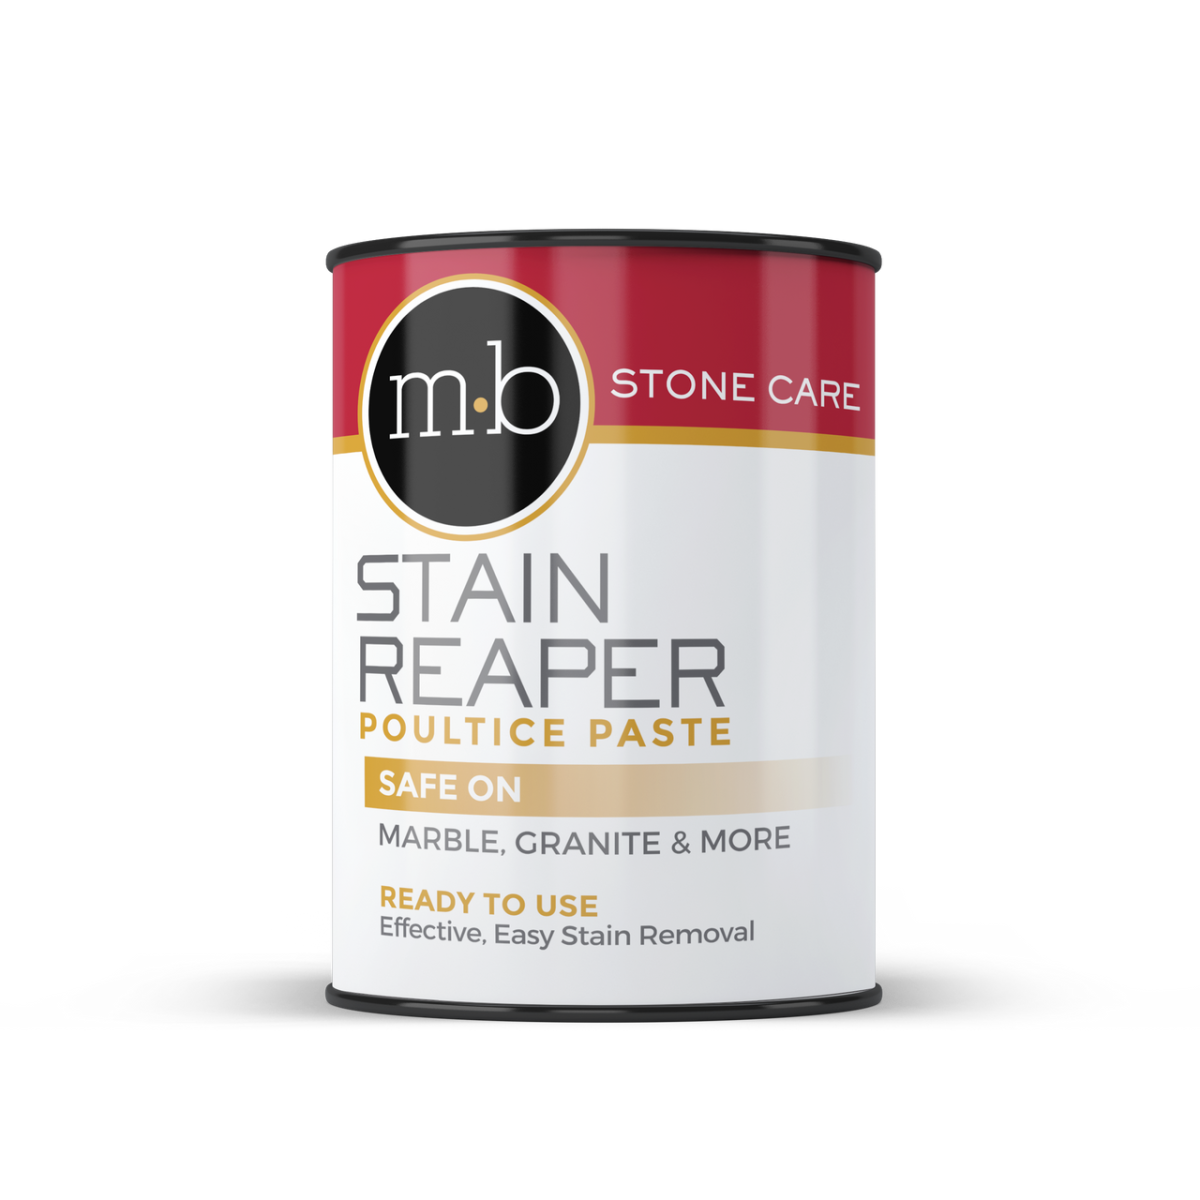 Stain Reaper - MB Stone Care